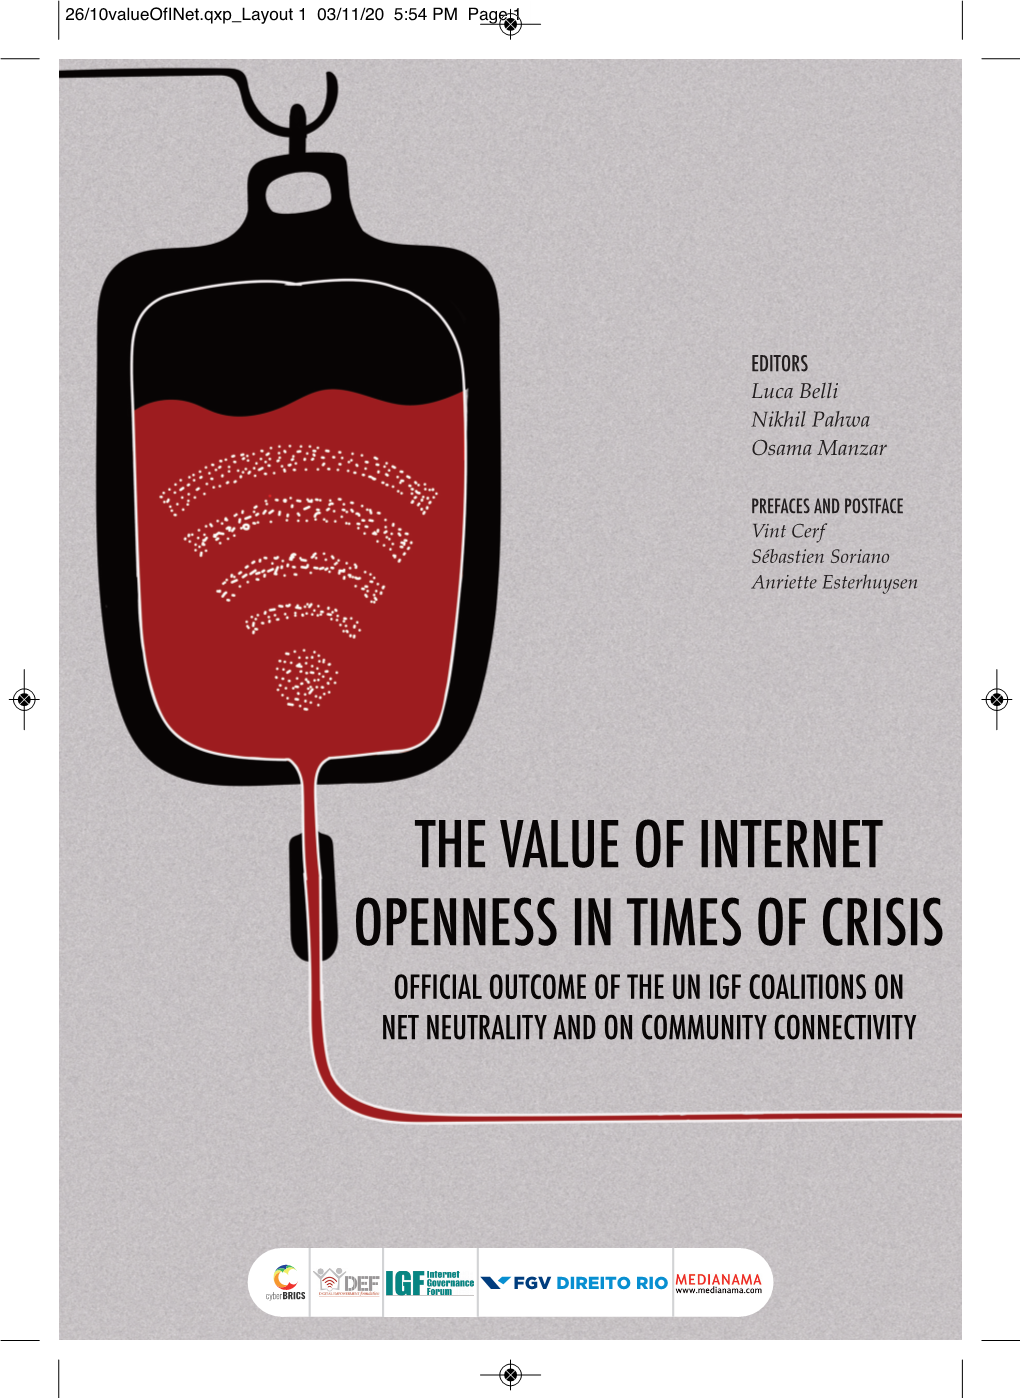 The Value of Internet Openness in Times of Crisis